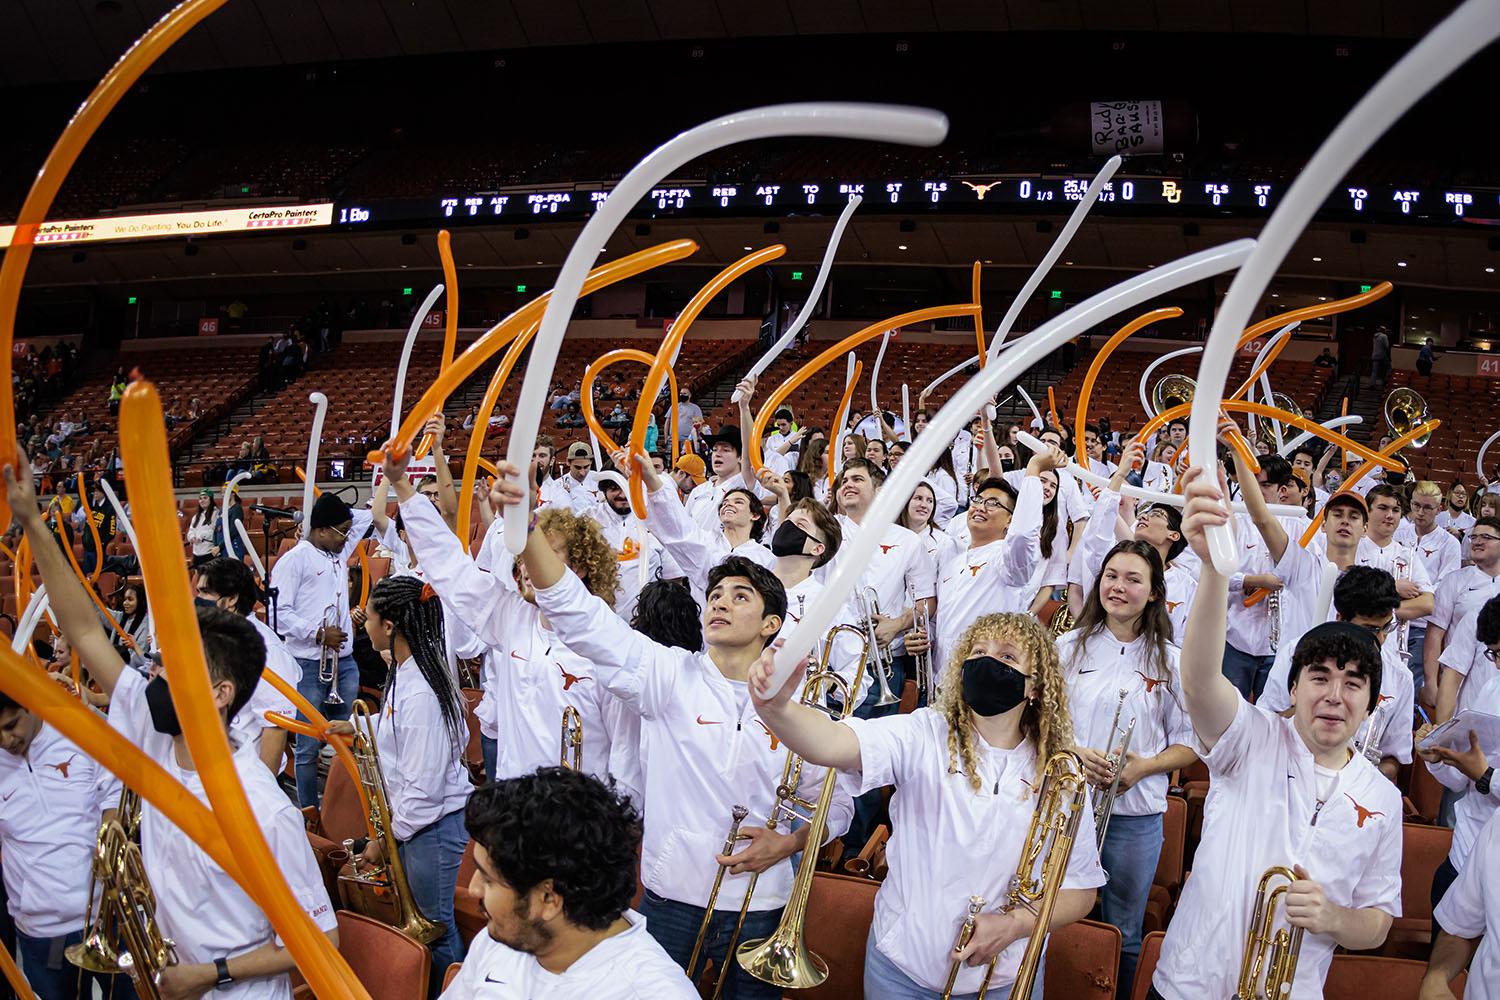 Pep Band members stand in the audience waving long burnt orange and white balloons in the air